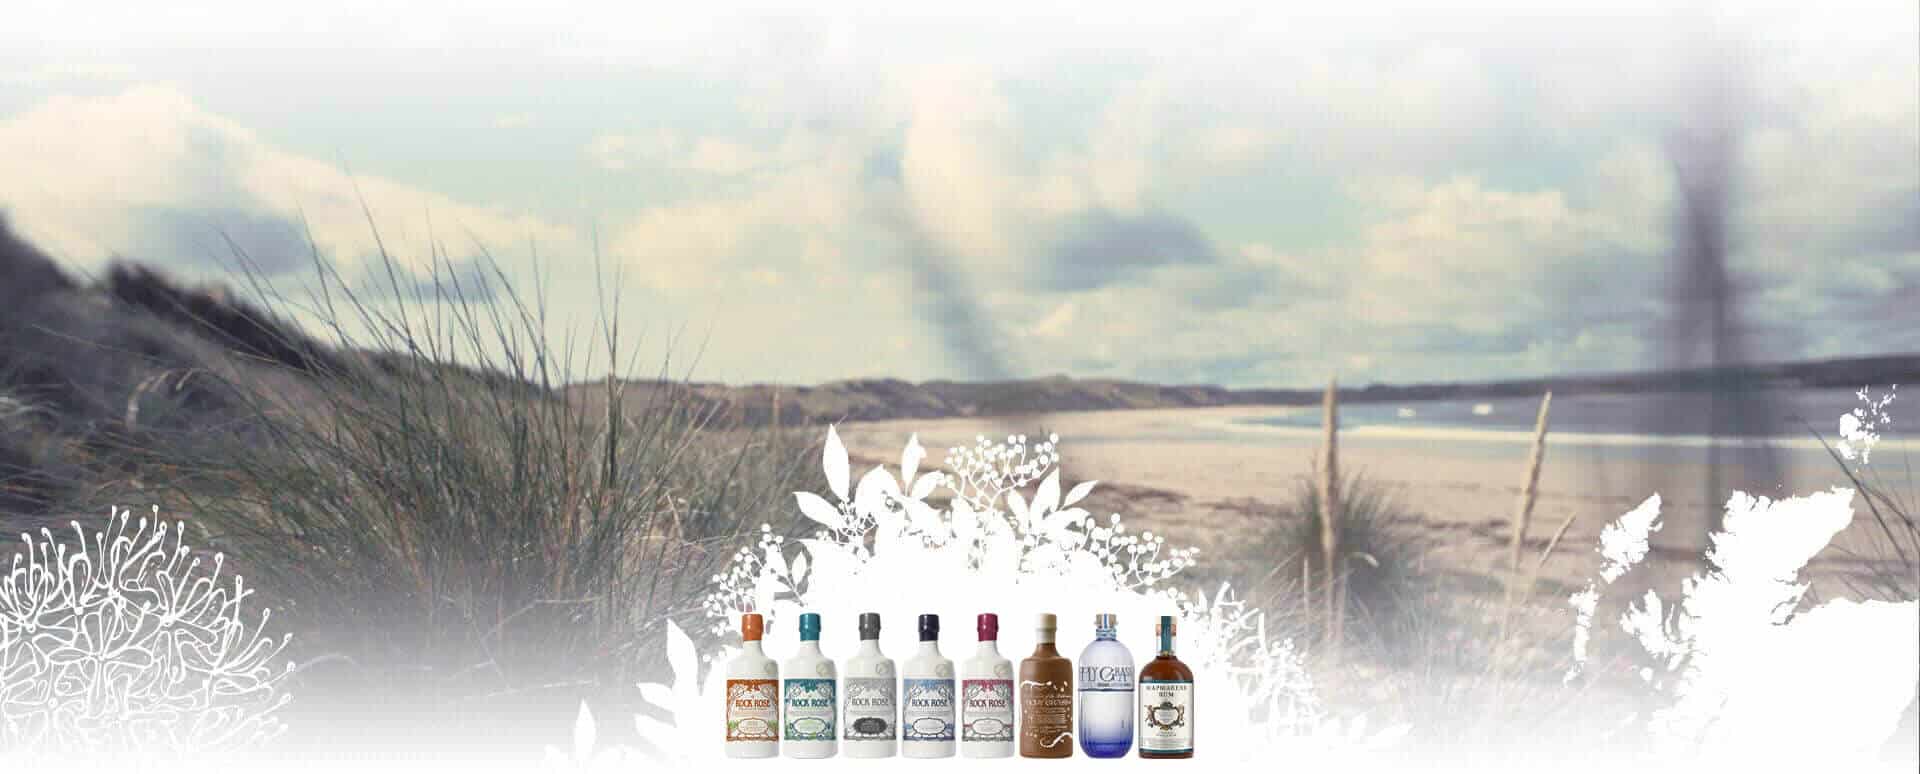 Dunnet Bay Distillers spirits bottles lined-up with Dunnet Bay beach in the background